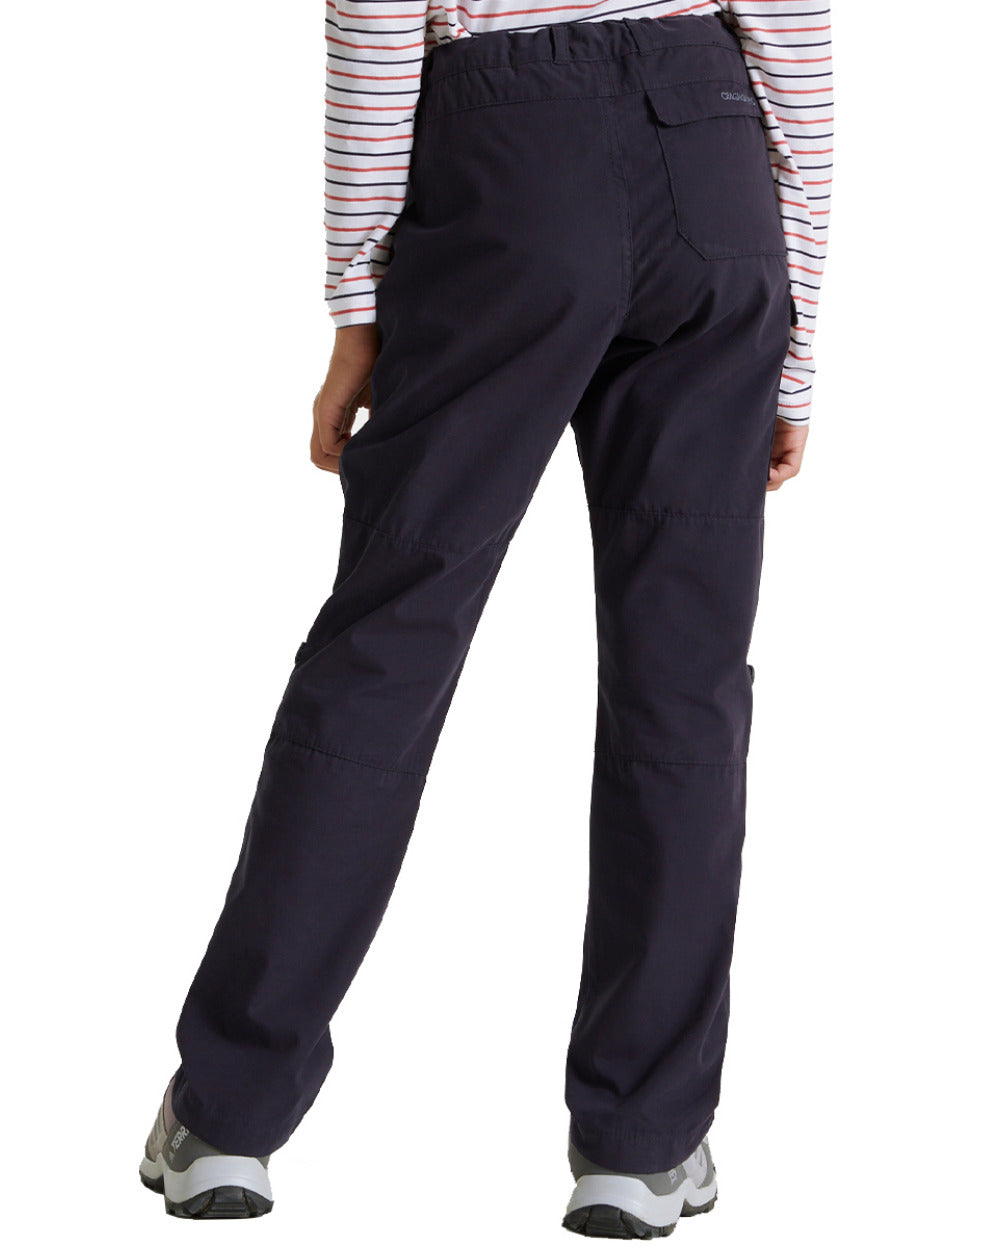 Dark Navy Coloured Craghoppers Childrens Kiwi II Trousers On A White Background 